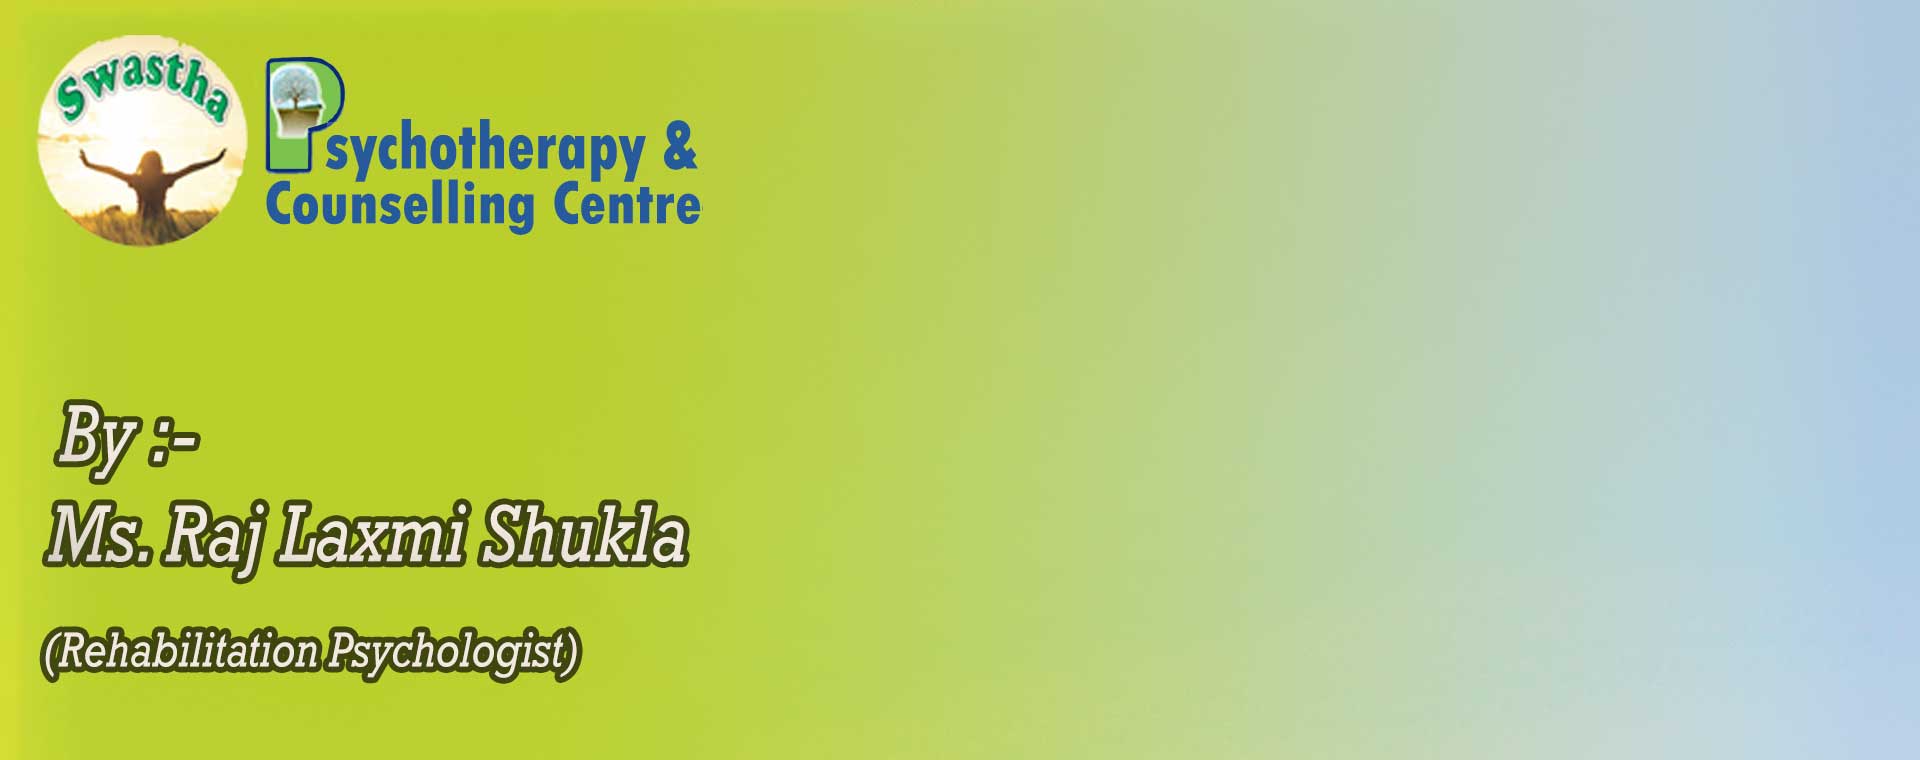 Psychotherapy & Counselling Centre